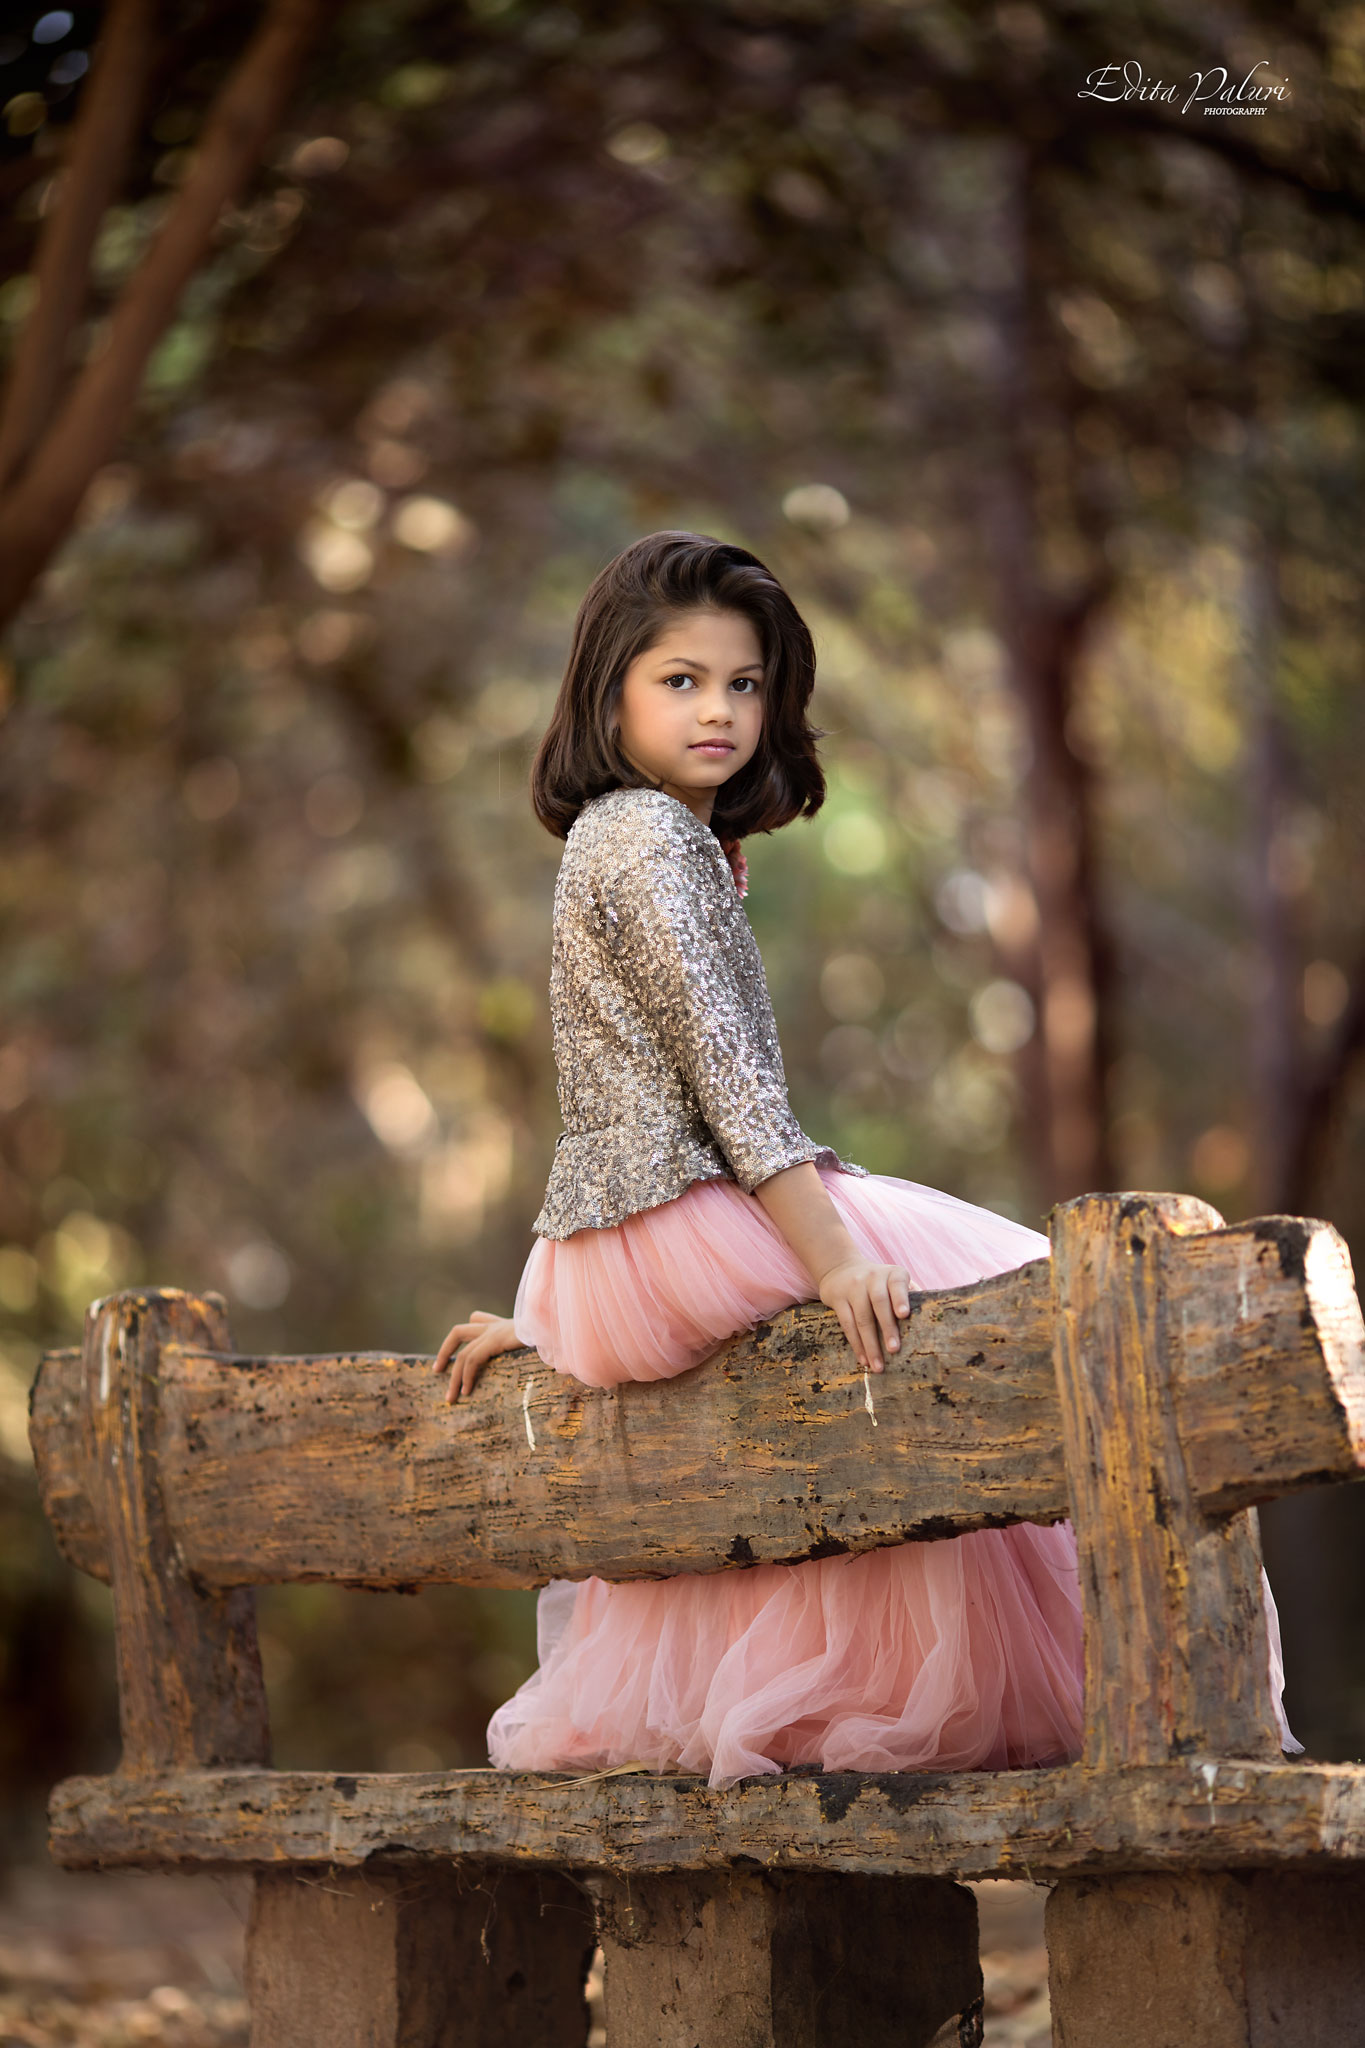 beautiful 8 year old girl photo session - child photographer in